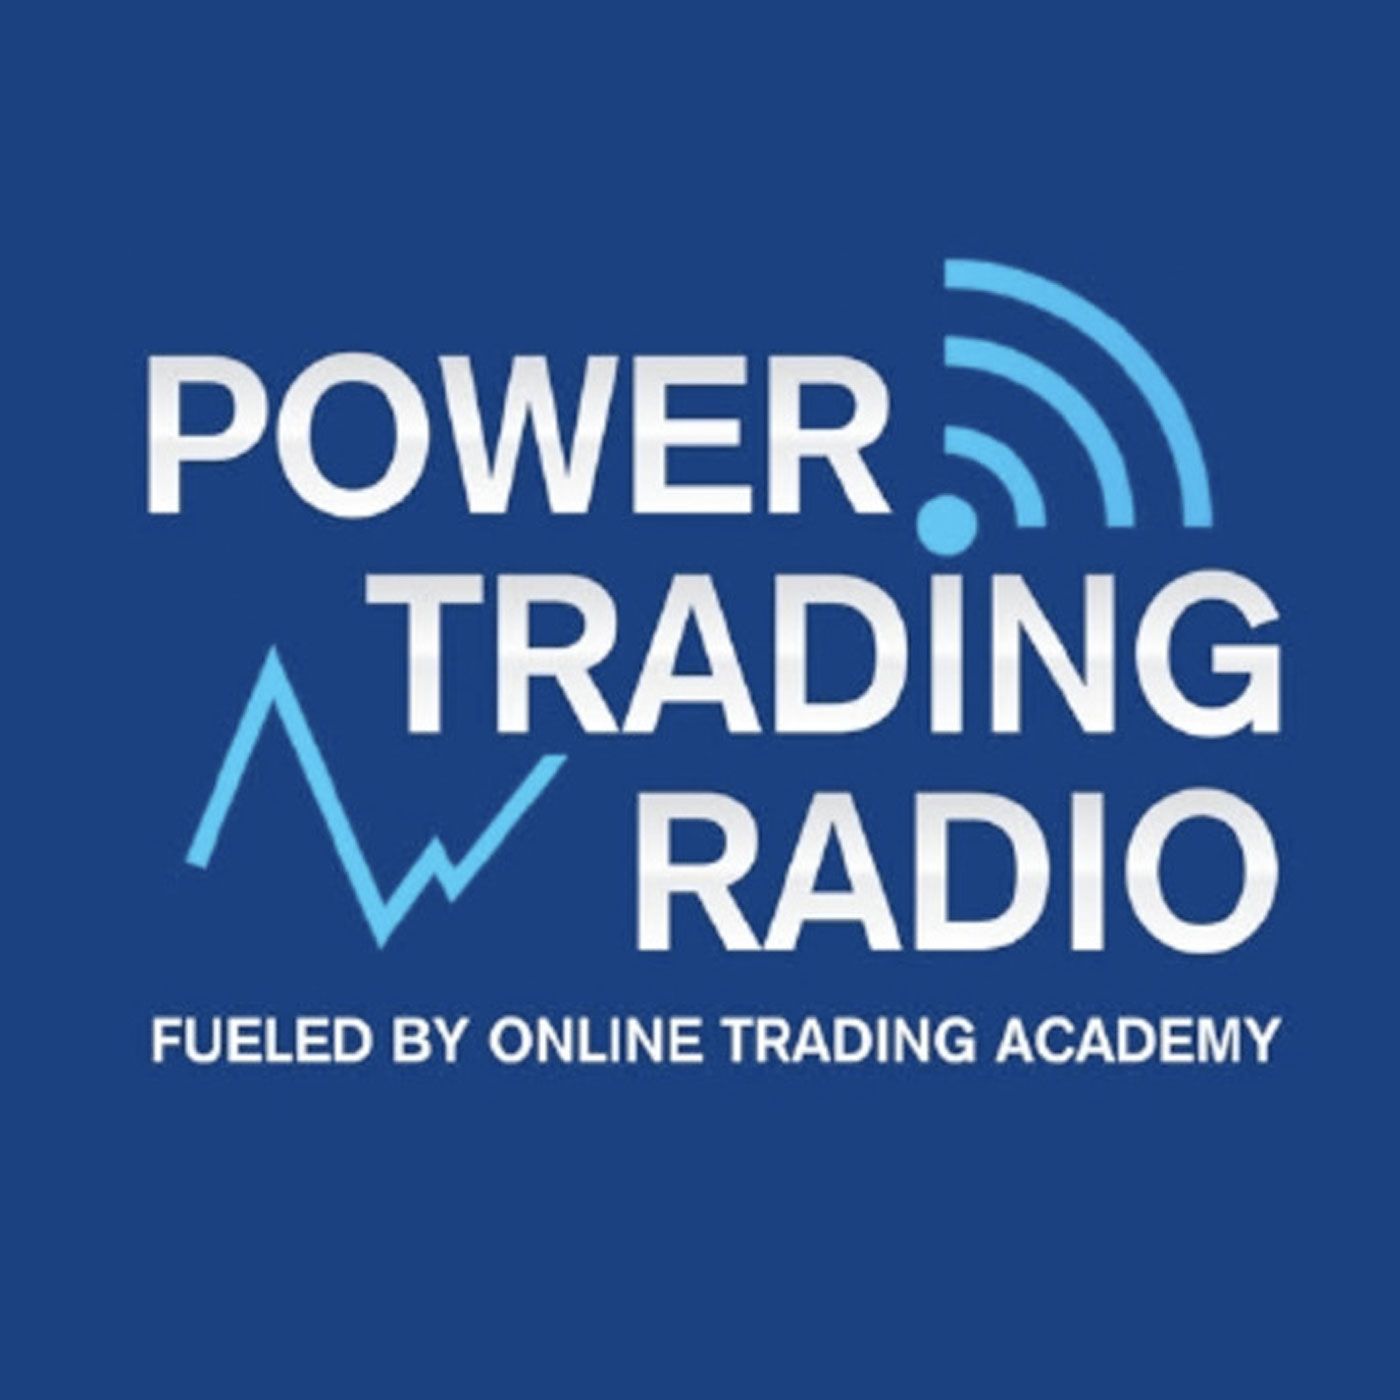 ONLINE TRADING ACADEMY 12-1-18